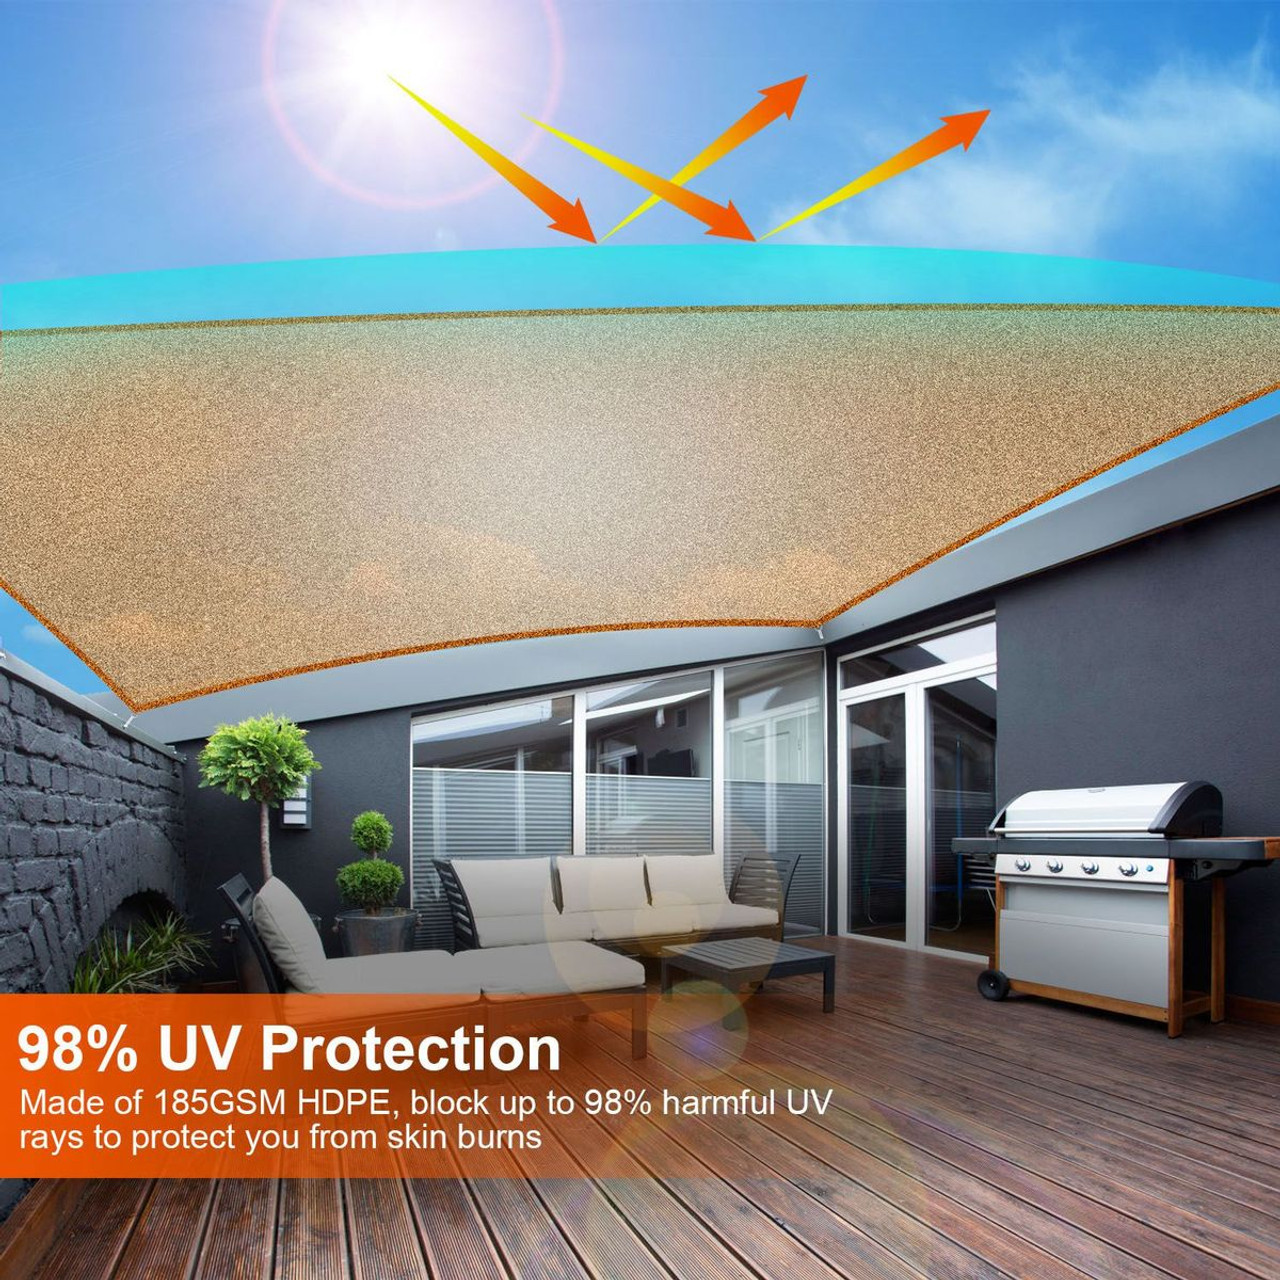 LakeForest® Shade Sail Patio Cover product image